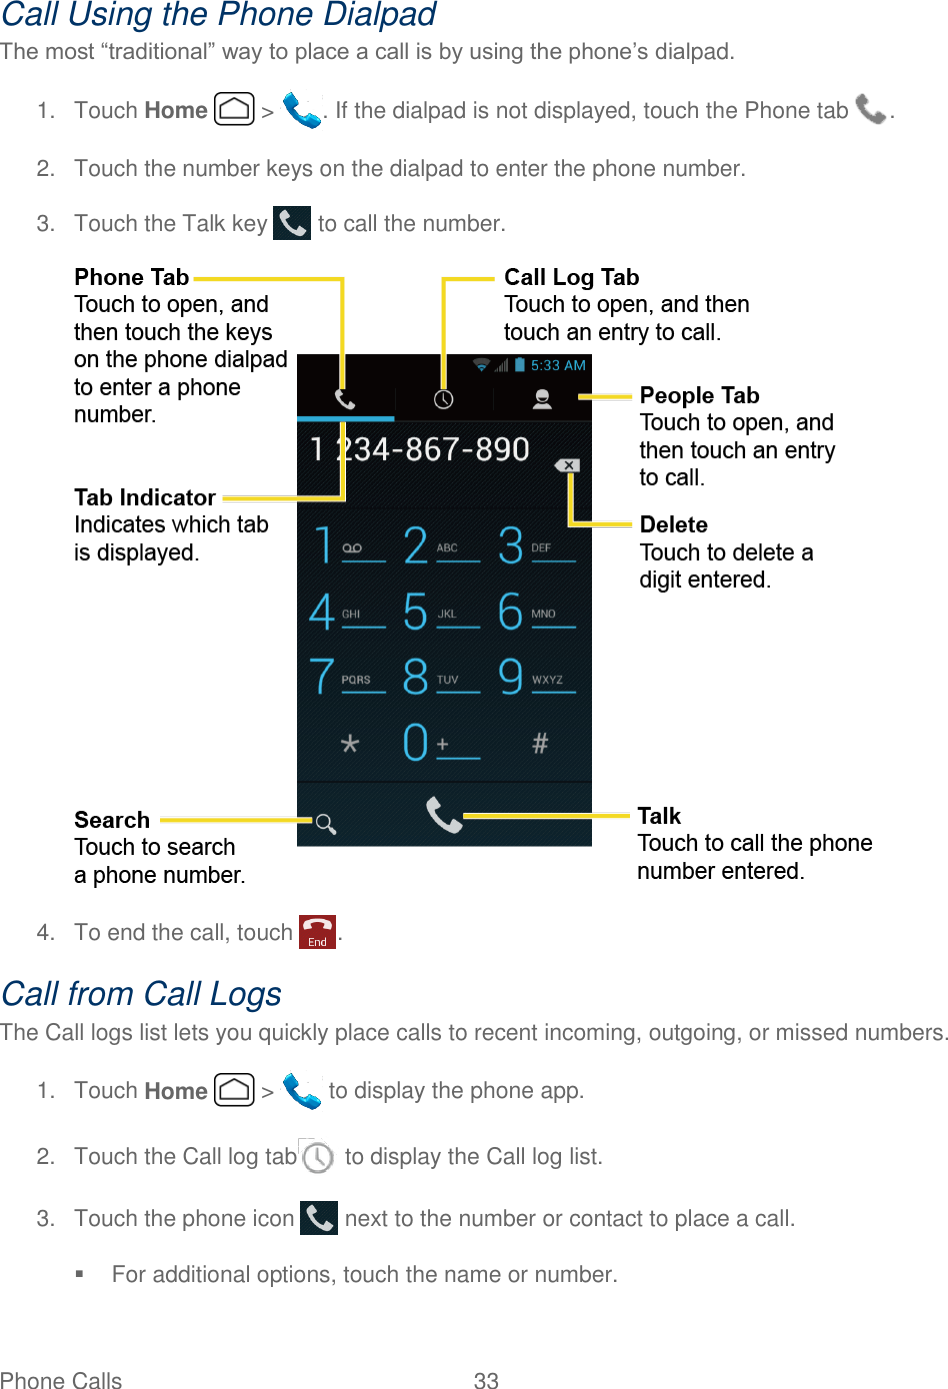 Phone Calls  33   Call Using the Phone Dialpad The most “traditional” way to place a call is by using the phone’s dialpad. 1.  Touch Home   &gt;  . If the dialpad is not displayed, touch the Phone tab  . 2.  Touch the number keys on the dialpad to enter the phone number. 3.  Touch the Talk key   to call the number.  4.  To end the call, touch  . Call from Call Logs The Call logs list lets you quickly place calls to recent incoming, outgoing, or missed numbers. 1.  Touch Home   &gt;   to display the phone app. 2.  Touch the Call log tab  to display the Call log list. 3.  Touch the phone icon   next to the number or contact to place a call.   For additional options, touch the name or number. 